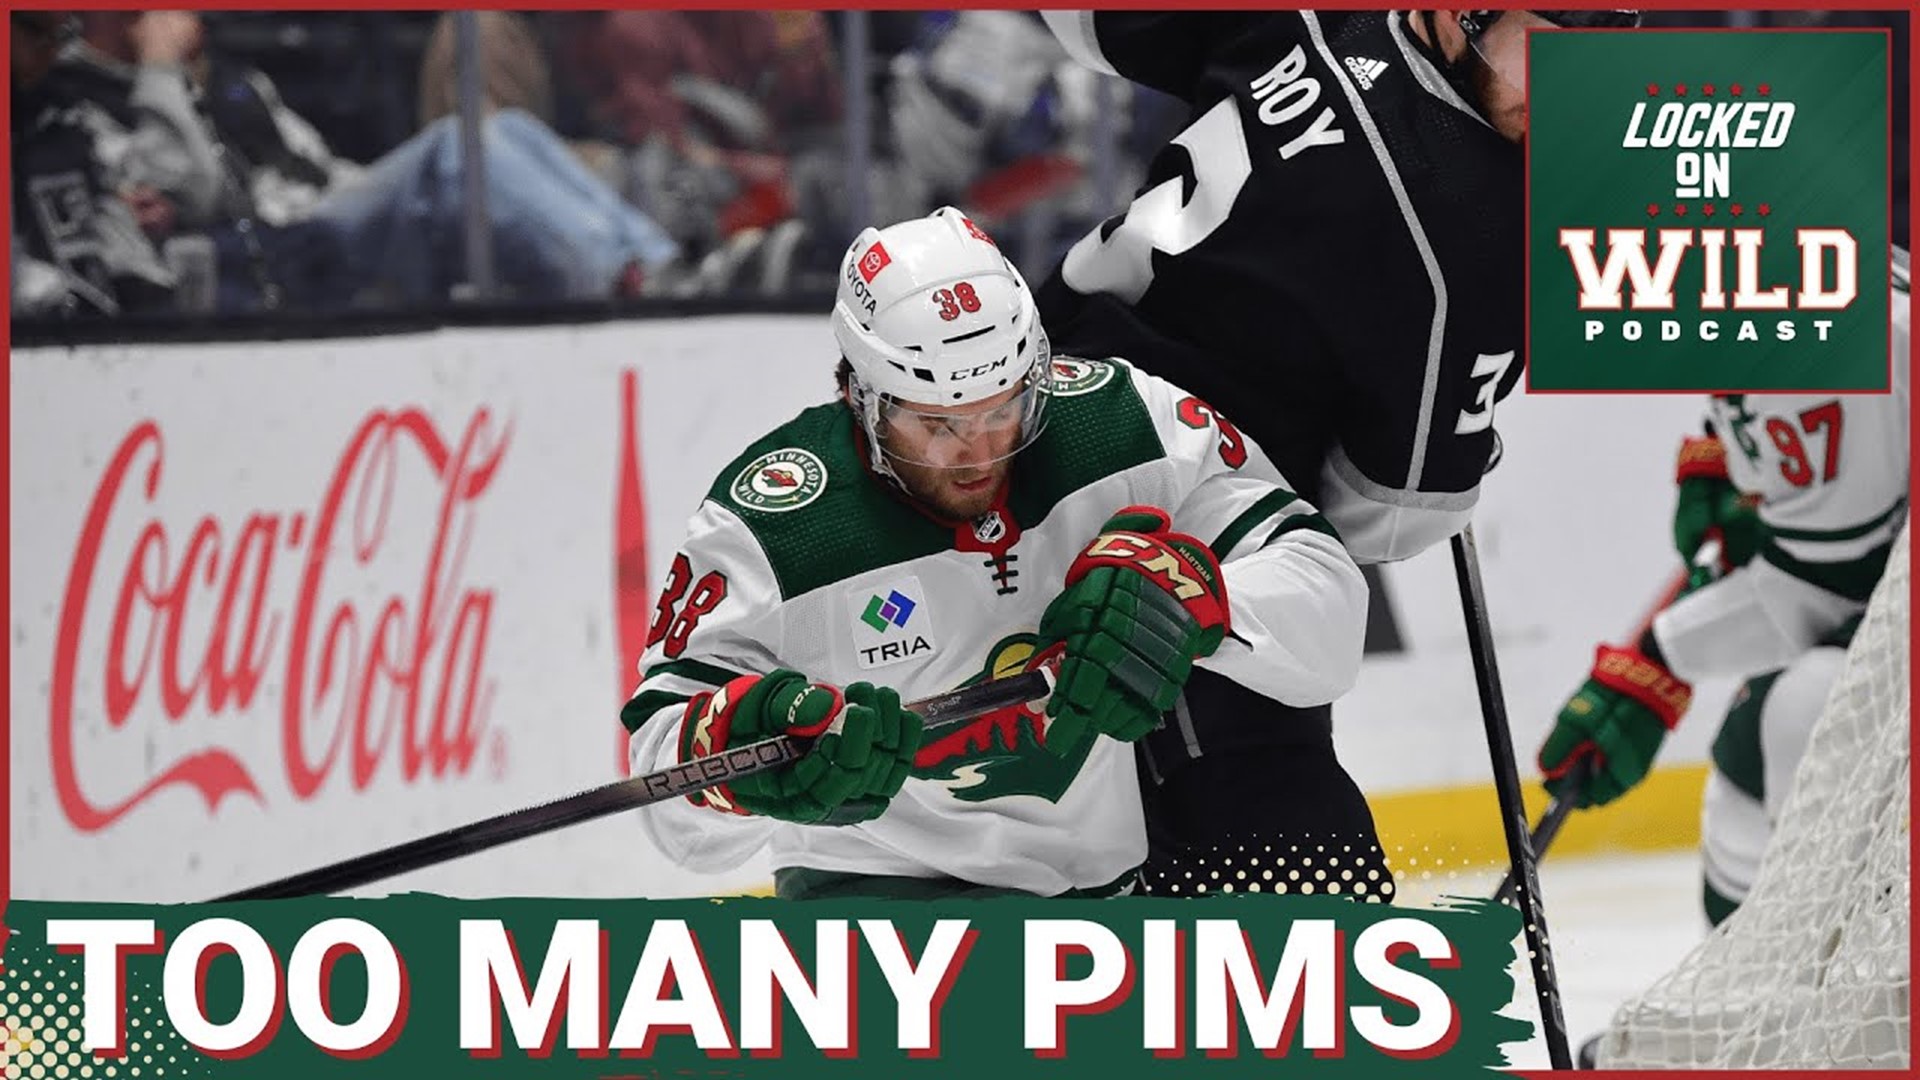 The Wild PK Has always been a Victim of Overuse